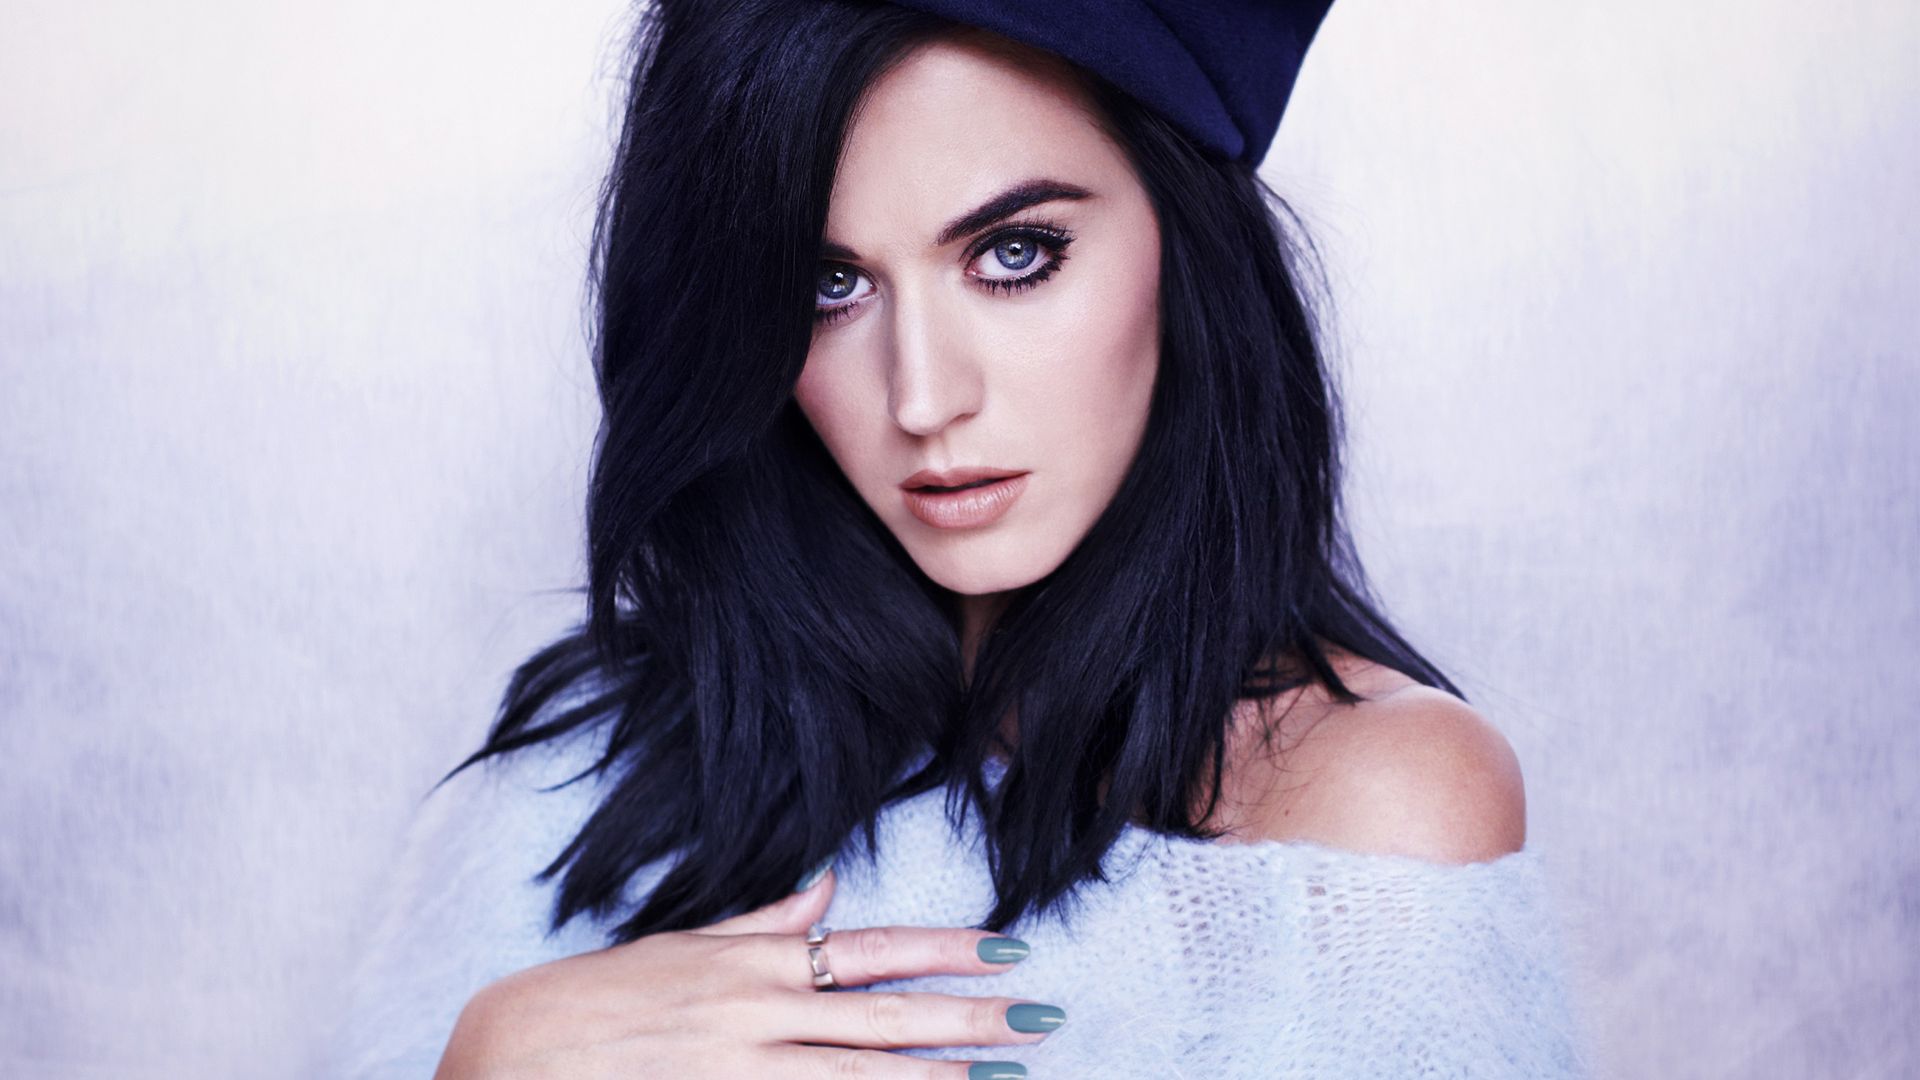 Wallpaper American celebrity Katy Perry